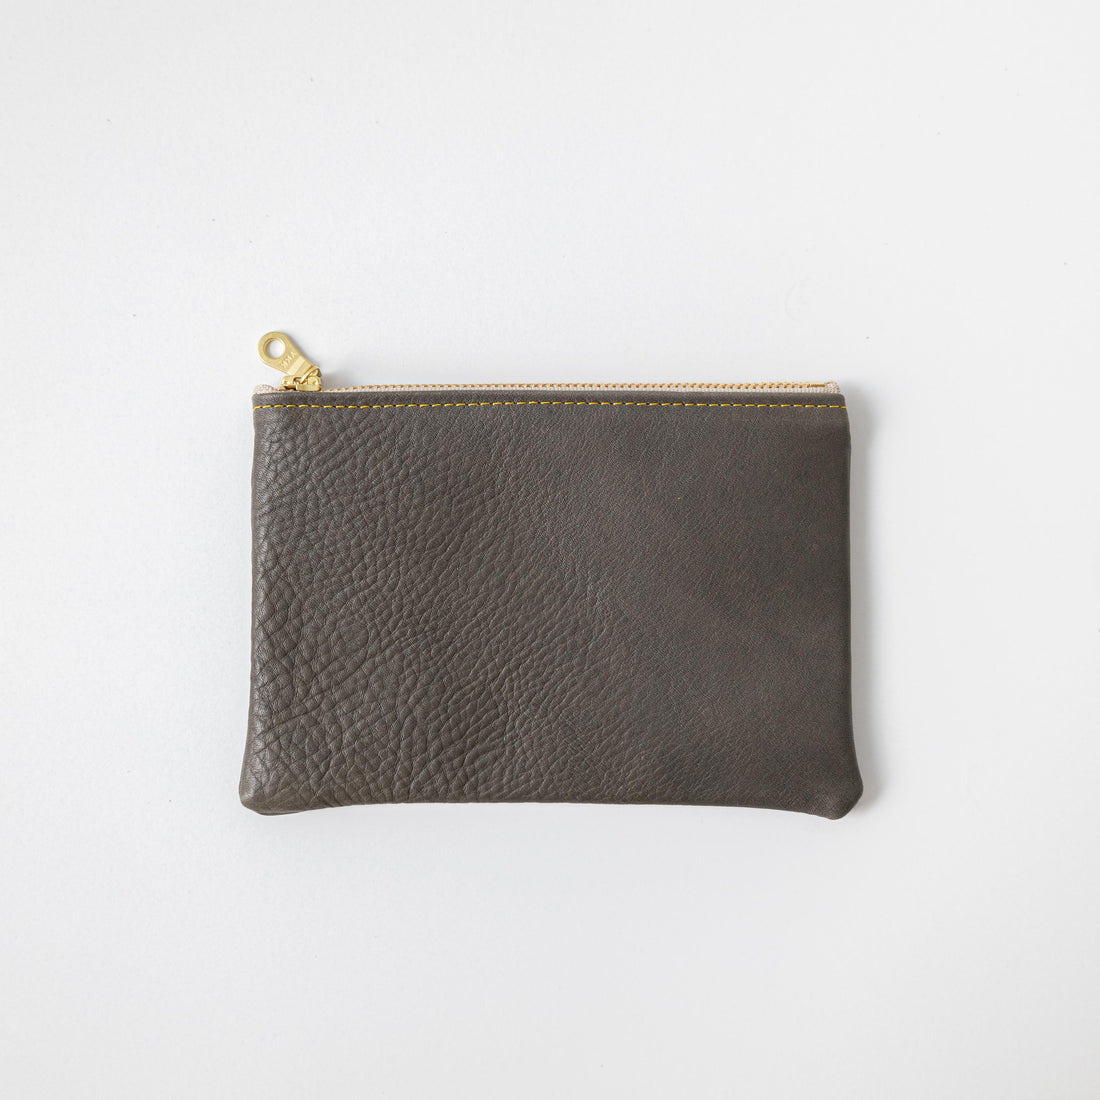 Small Full-Grain Leather Zipper Pouch - No. 1 Zip It, USA Made